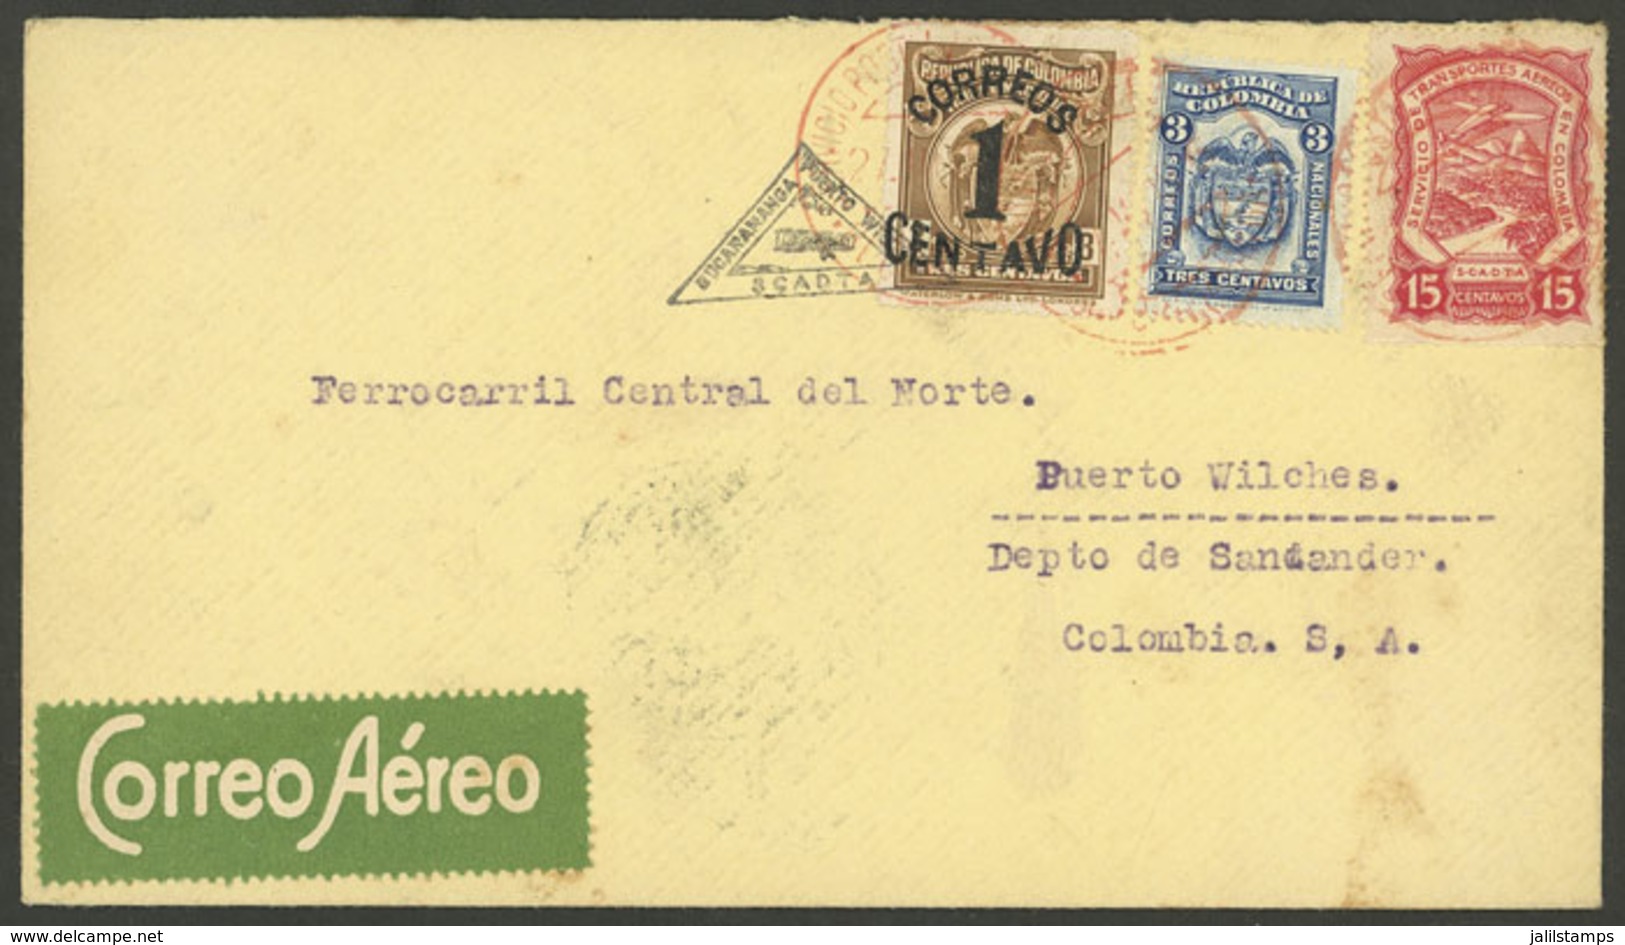 COLOMBIA: 27/MAR/1926 Bucaramanga - Puerto Wilches, S.C.A.D.T.A. First Flight, Cover With Arrival Backstamp, VF Quality! - Colombia